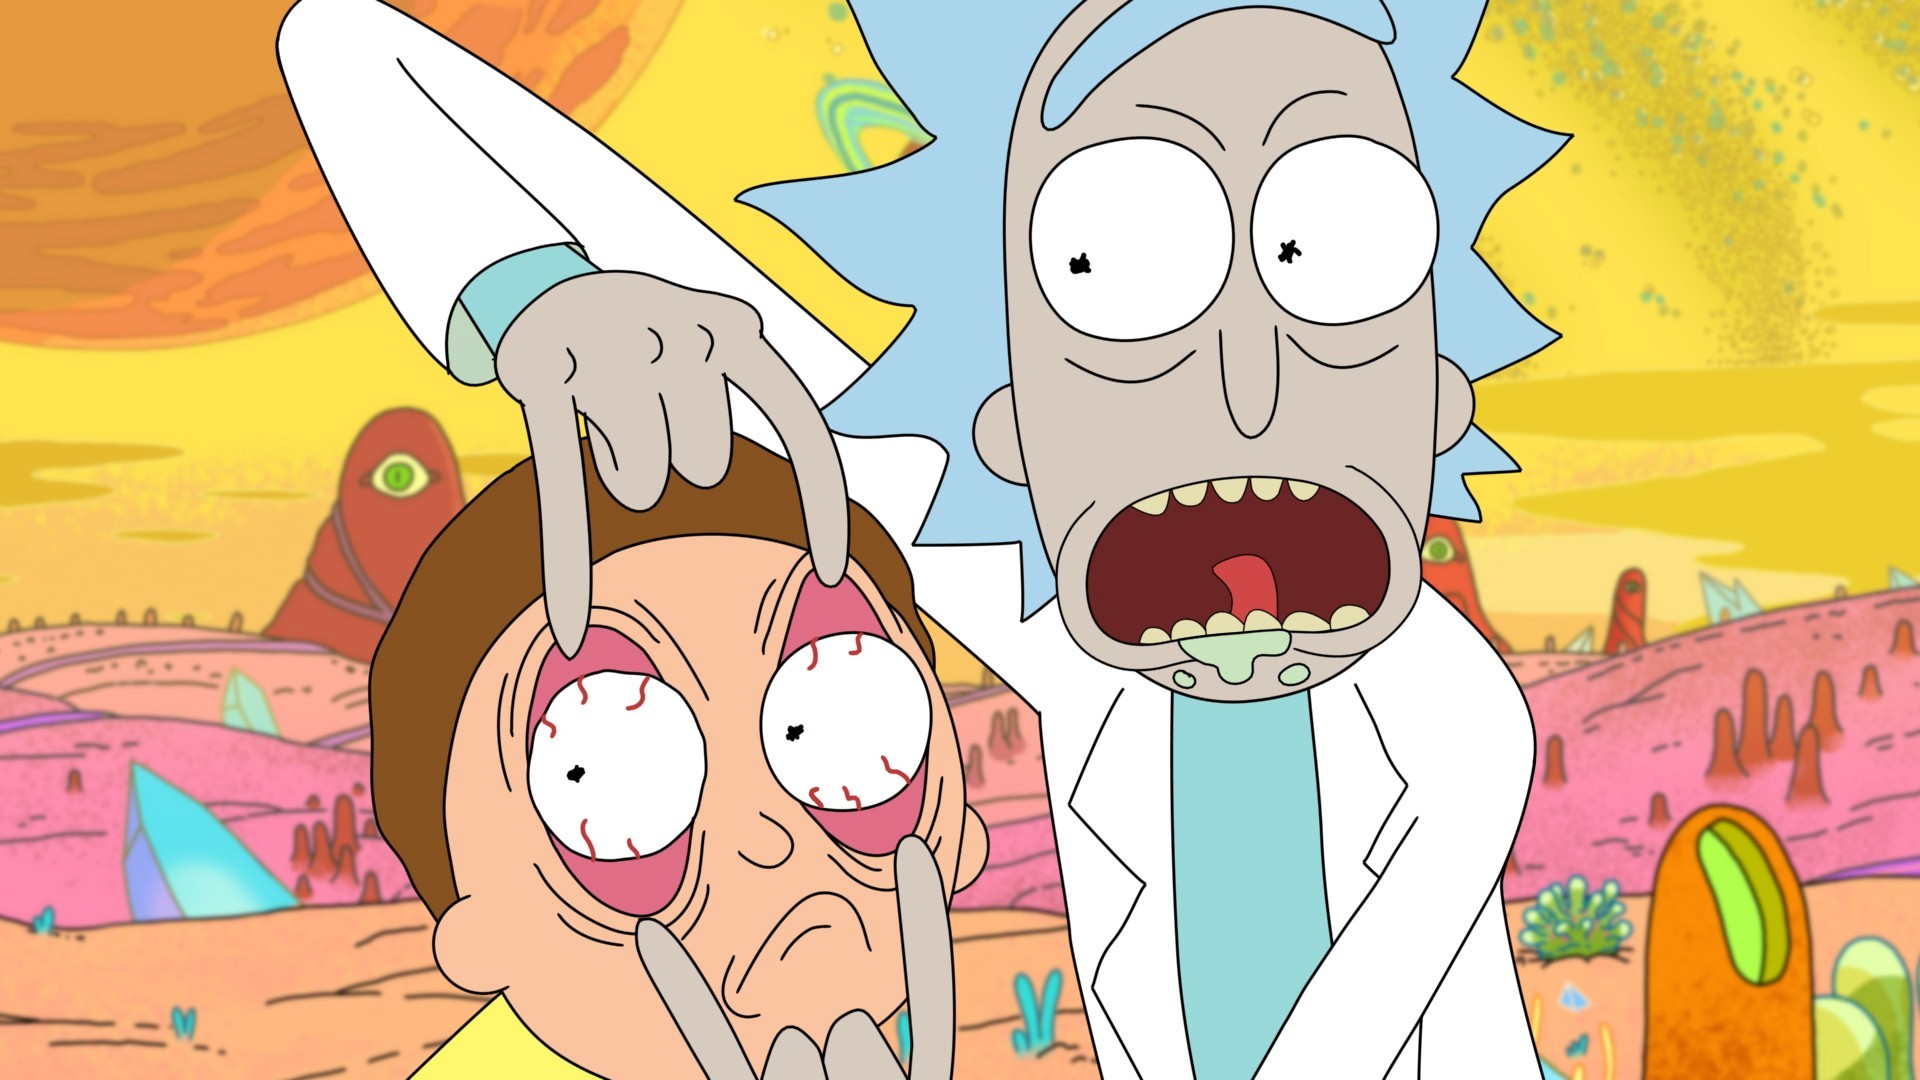 New Rick and Morty Full Movie Wallpaper With high-resolution 1920X1080 pixel. You can use this poster wallpaper for your Desktop Computers, Mac Screensavers, Windows Backgrounds, iPhone Wallpapers, Tablet or Android Lock screen and another Mobile device